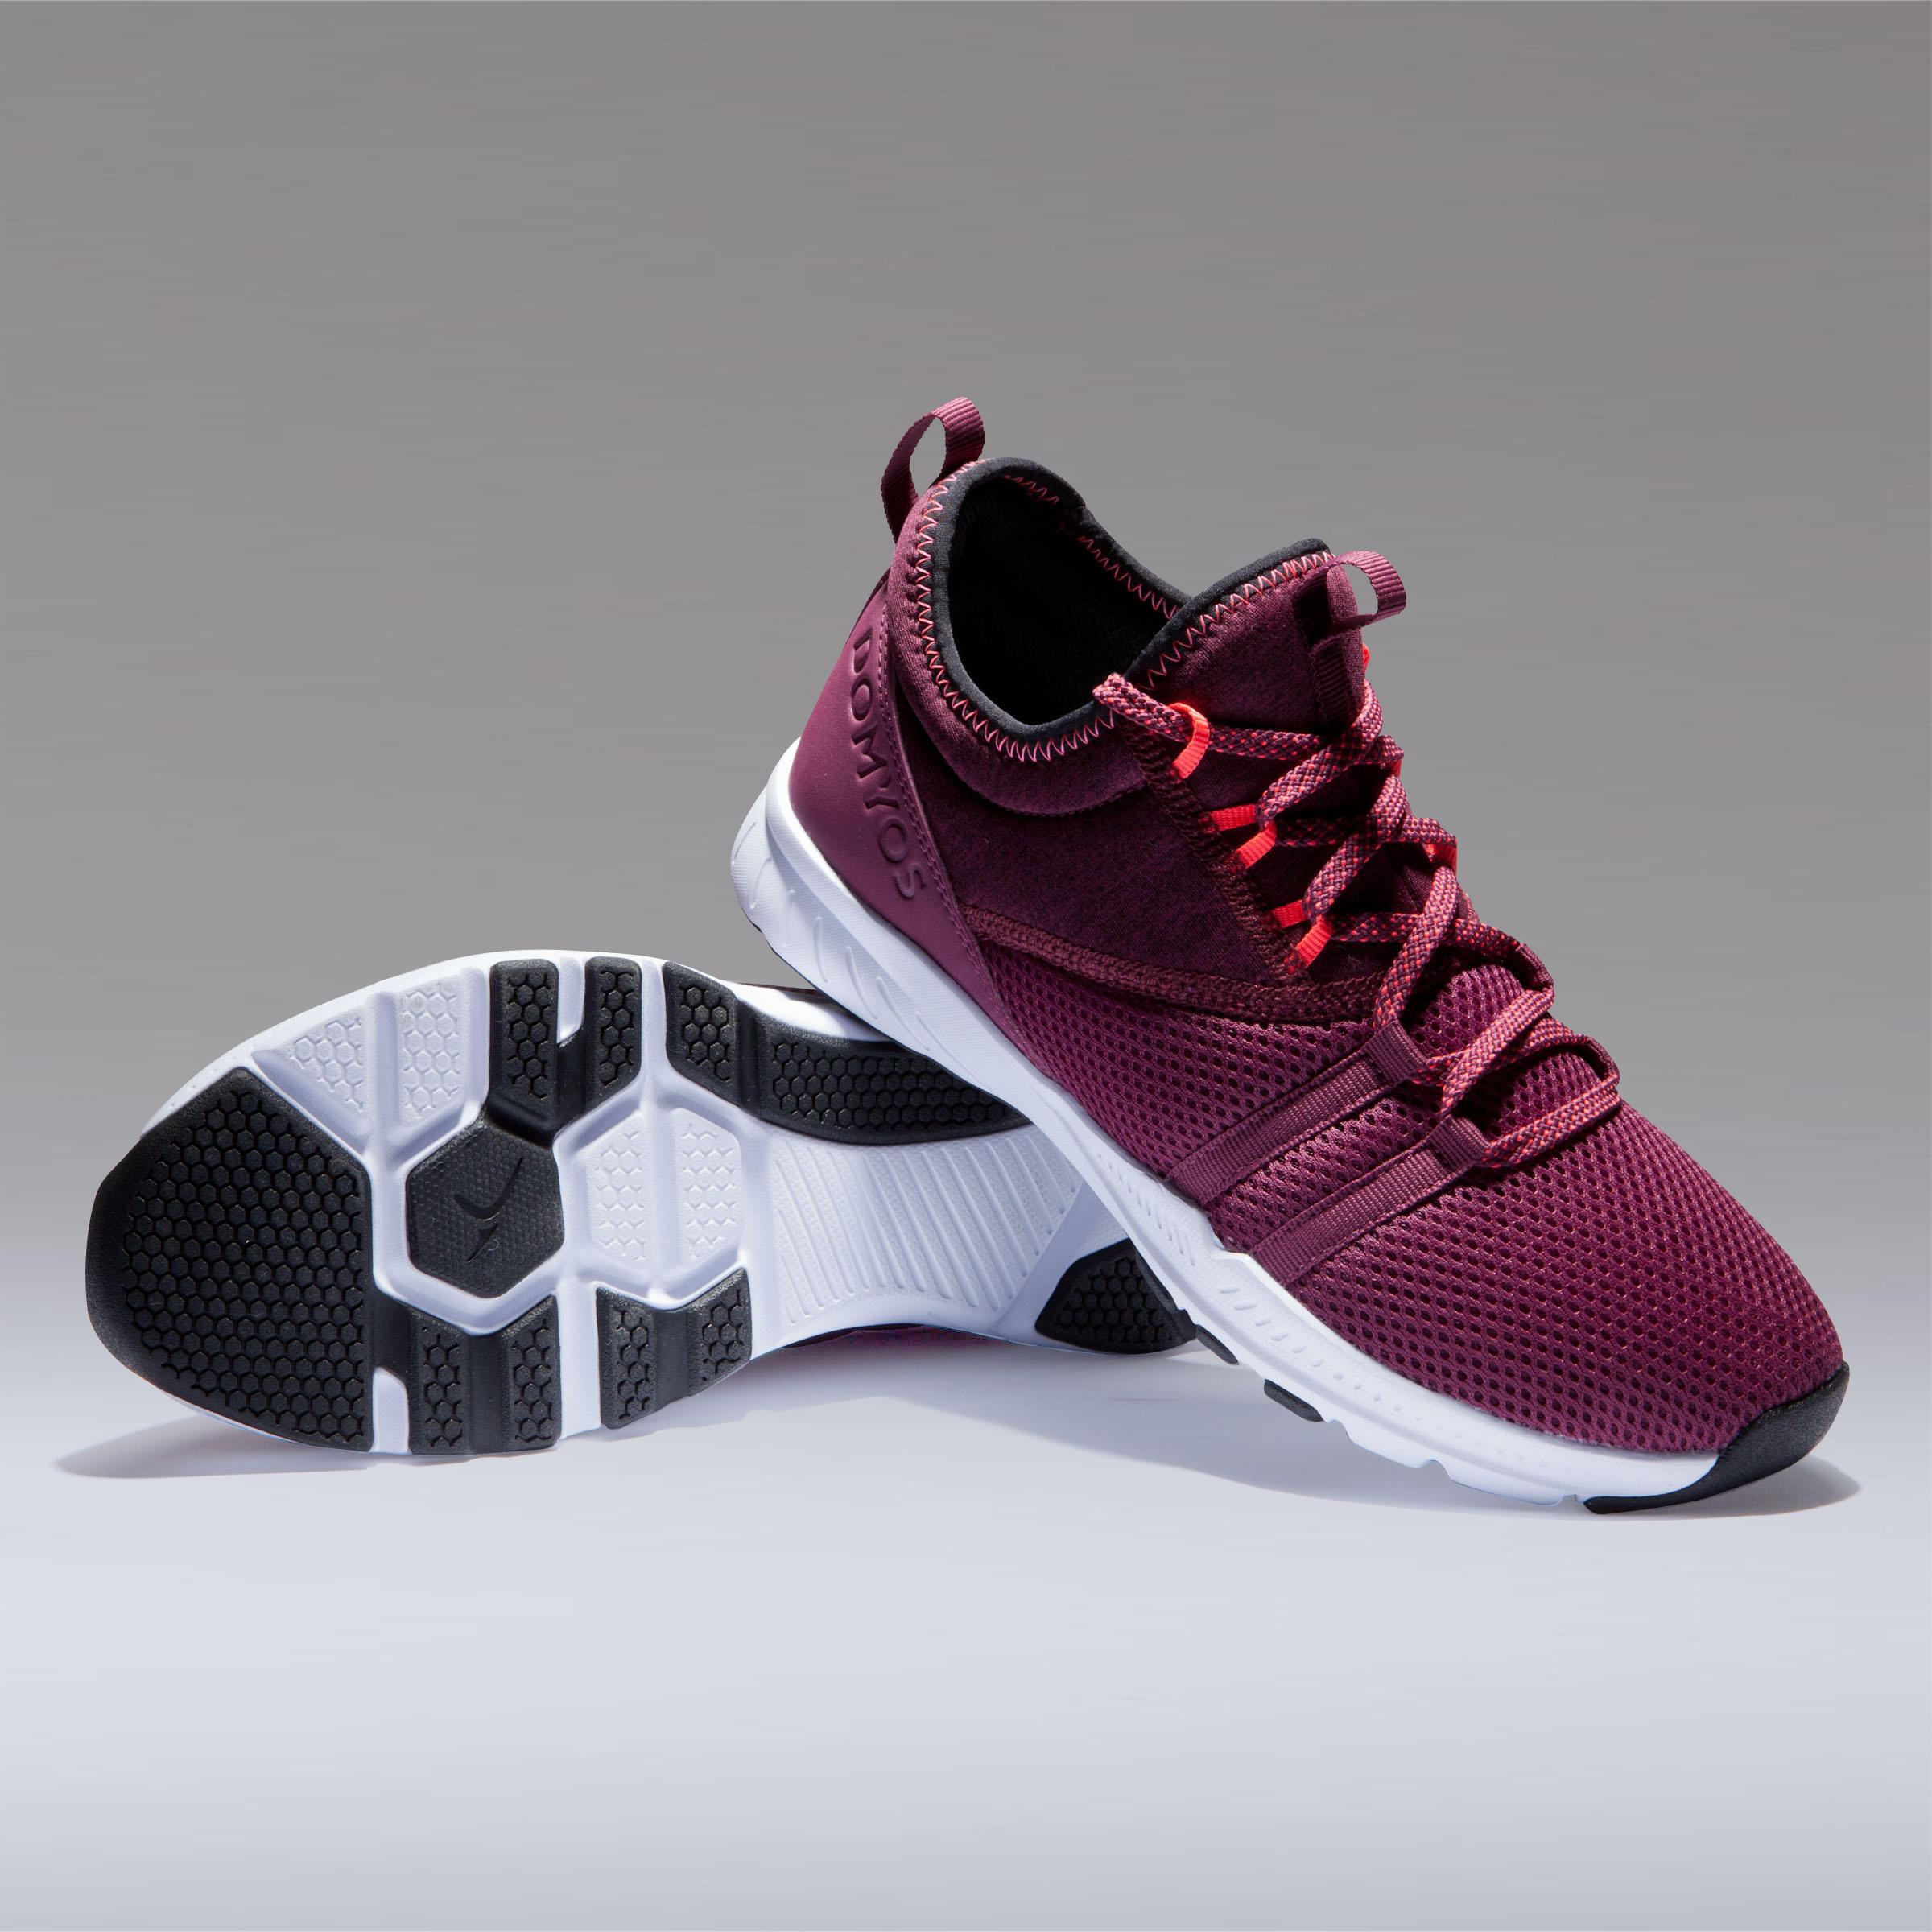 Women's Fitness Shoes 120 Mid - Burgundy 6/16